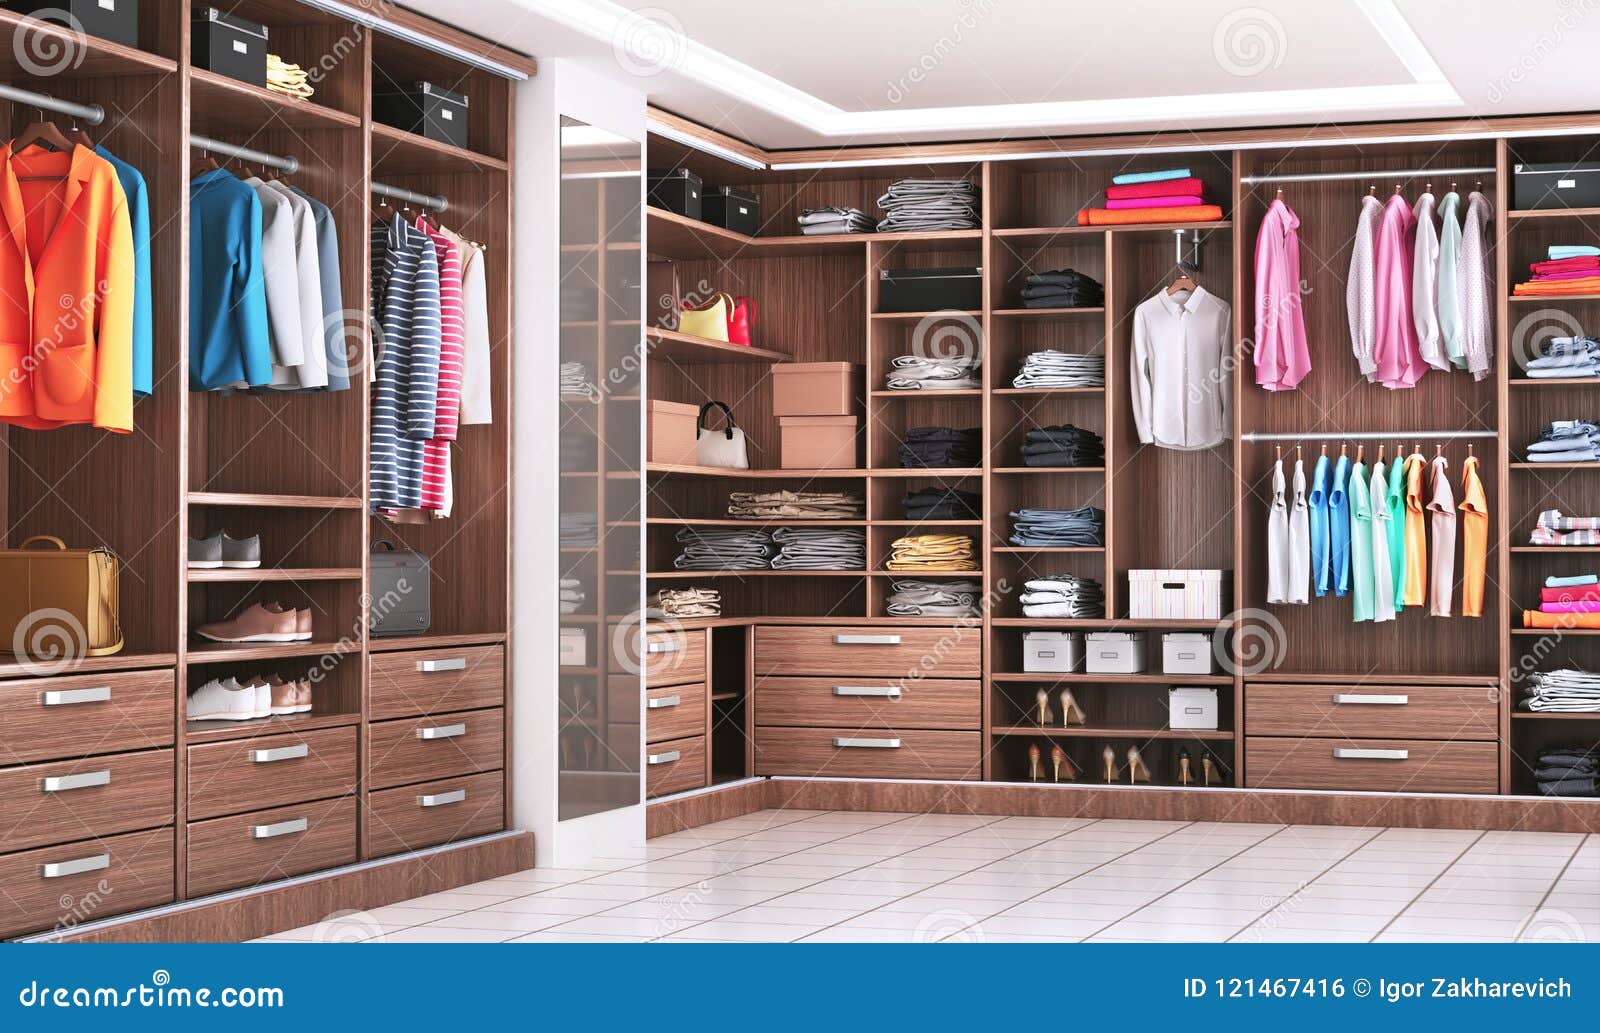 modern wooden wardrobe with clothes hanging on rail in walk in closet  interior.